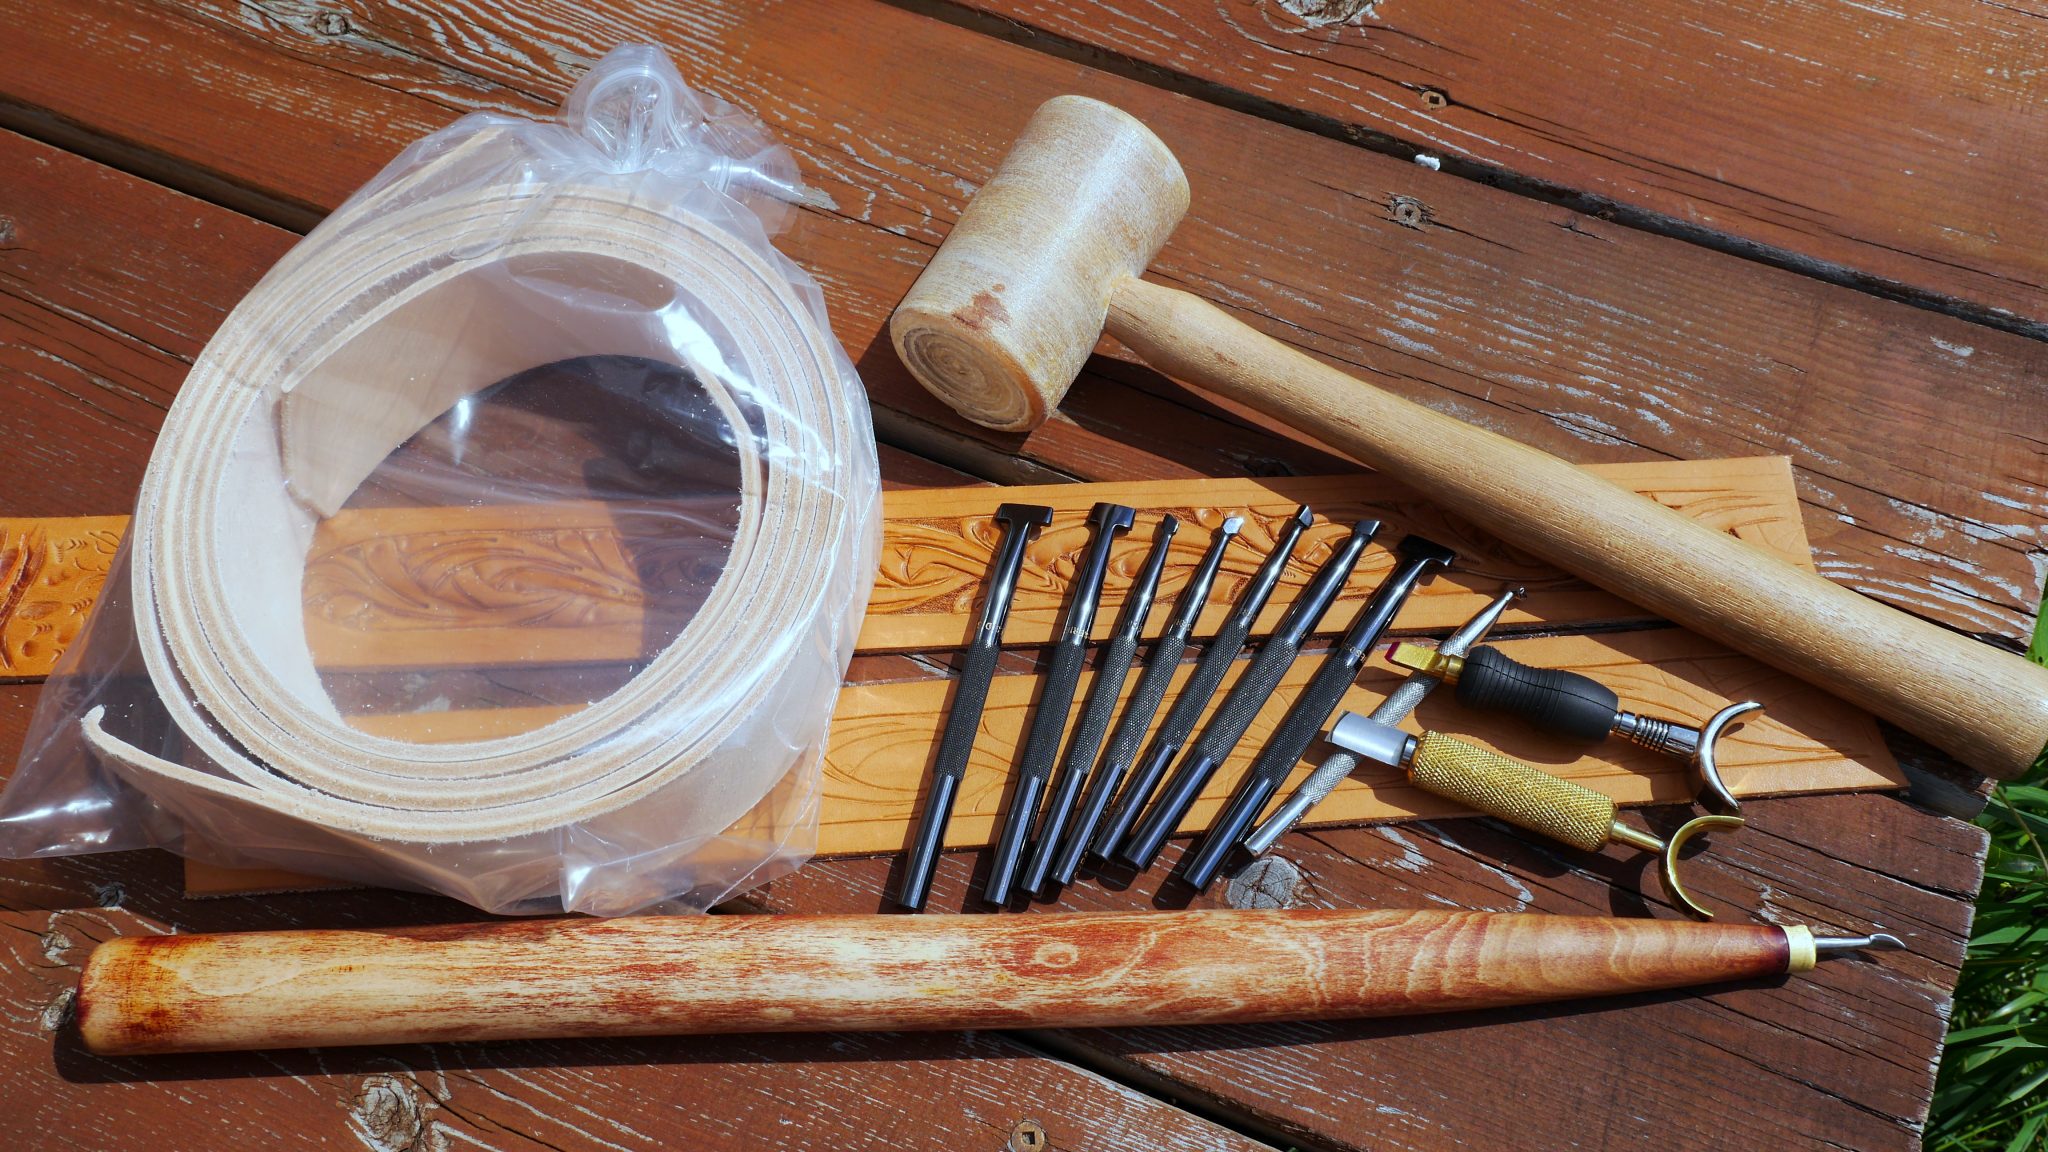 Leathercraft tools for carving and tooling leather. – Pikva